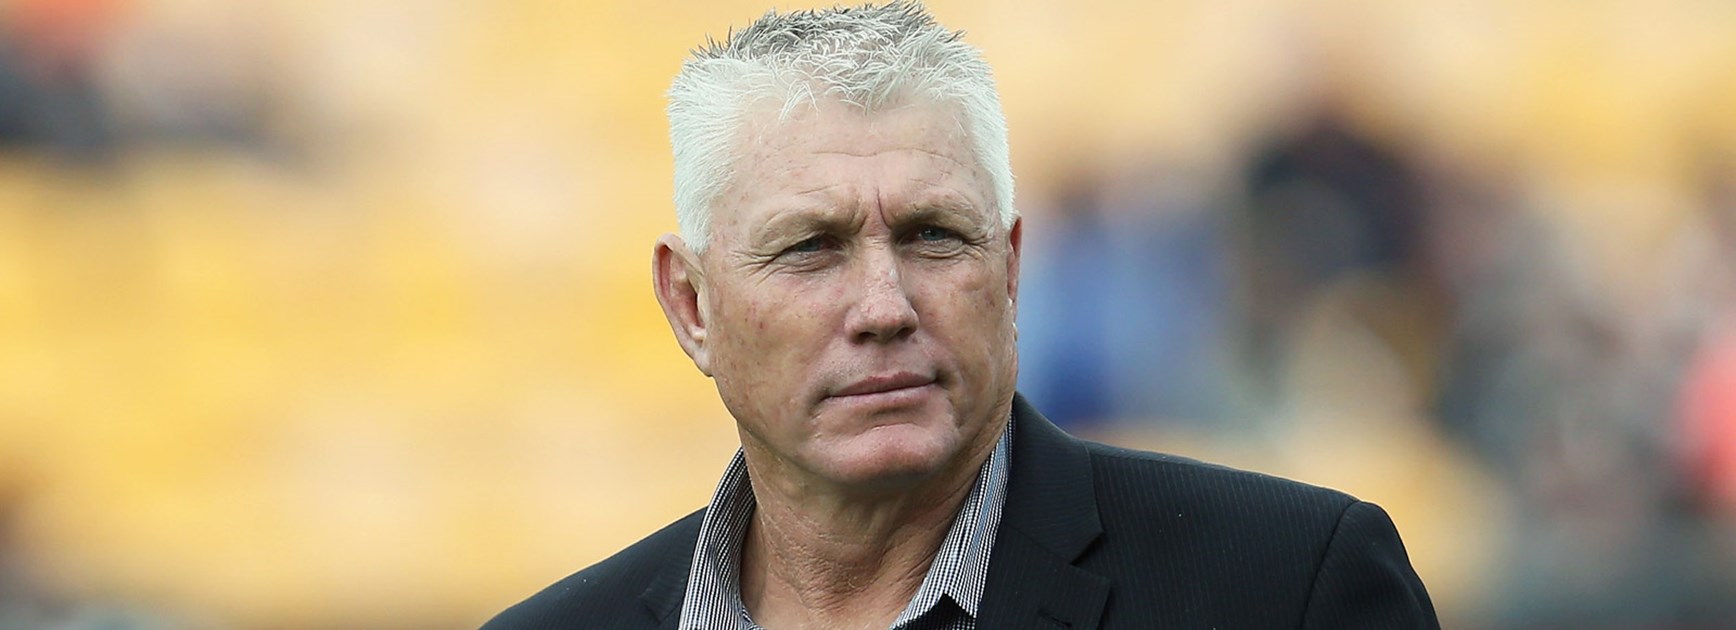 Knights coach Rick Stone has been released by the club.